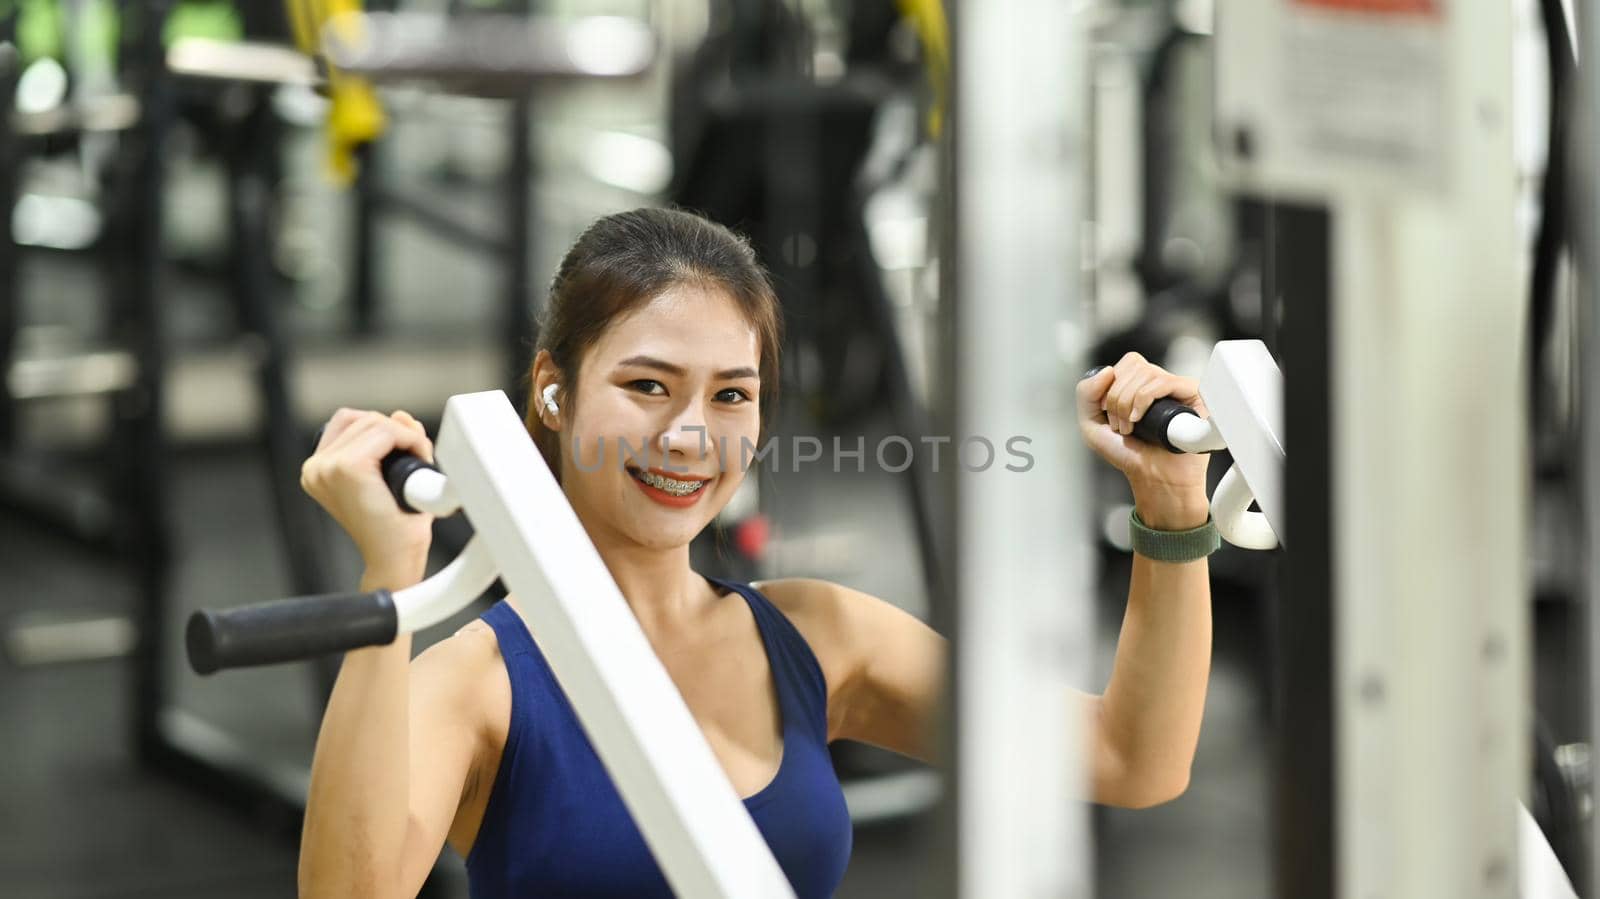 Fitness women in sportswear exercising at the gym.